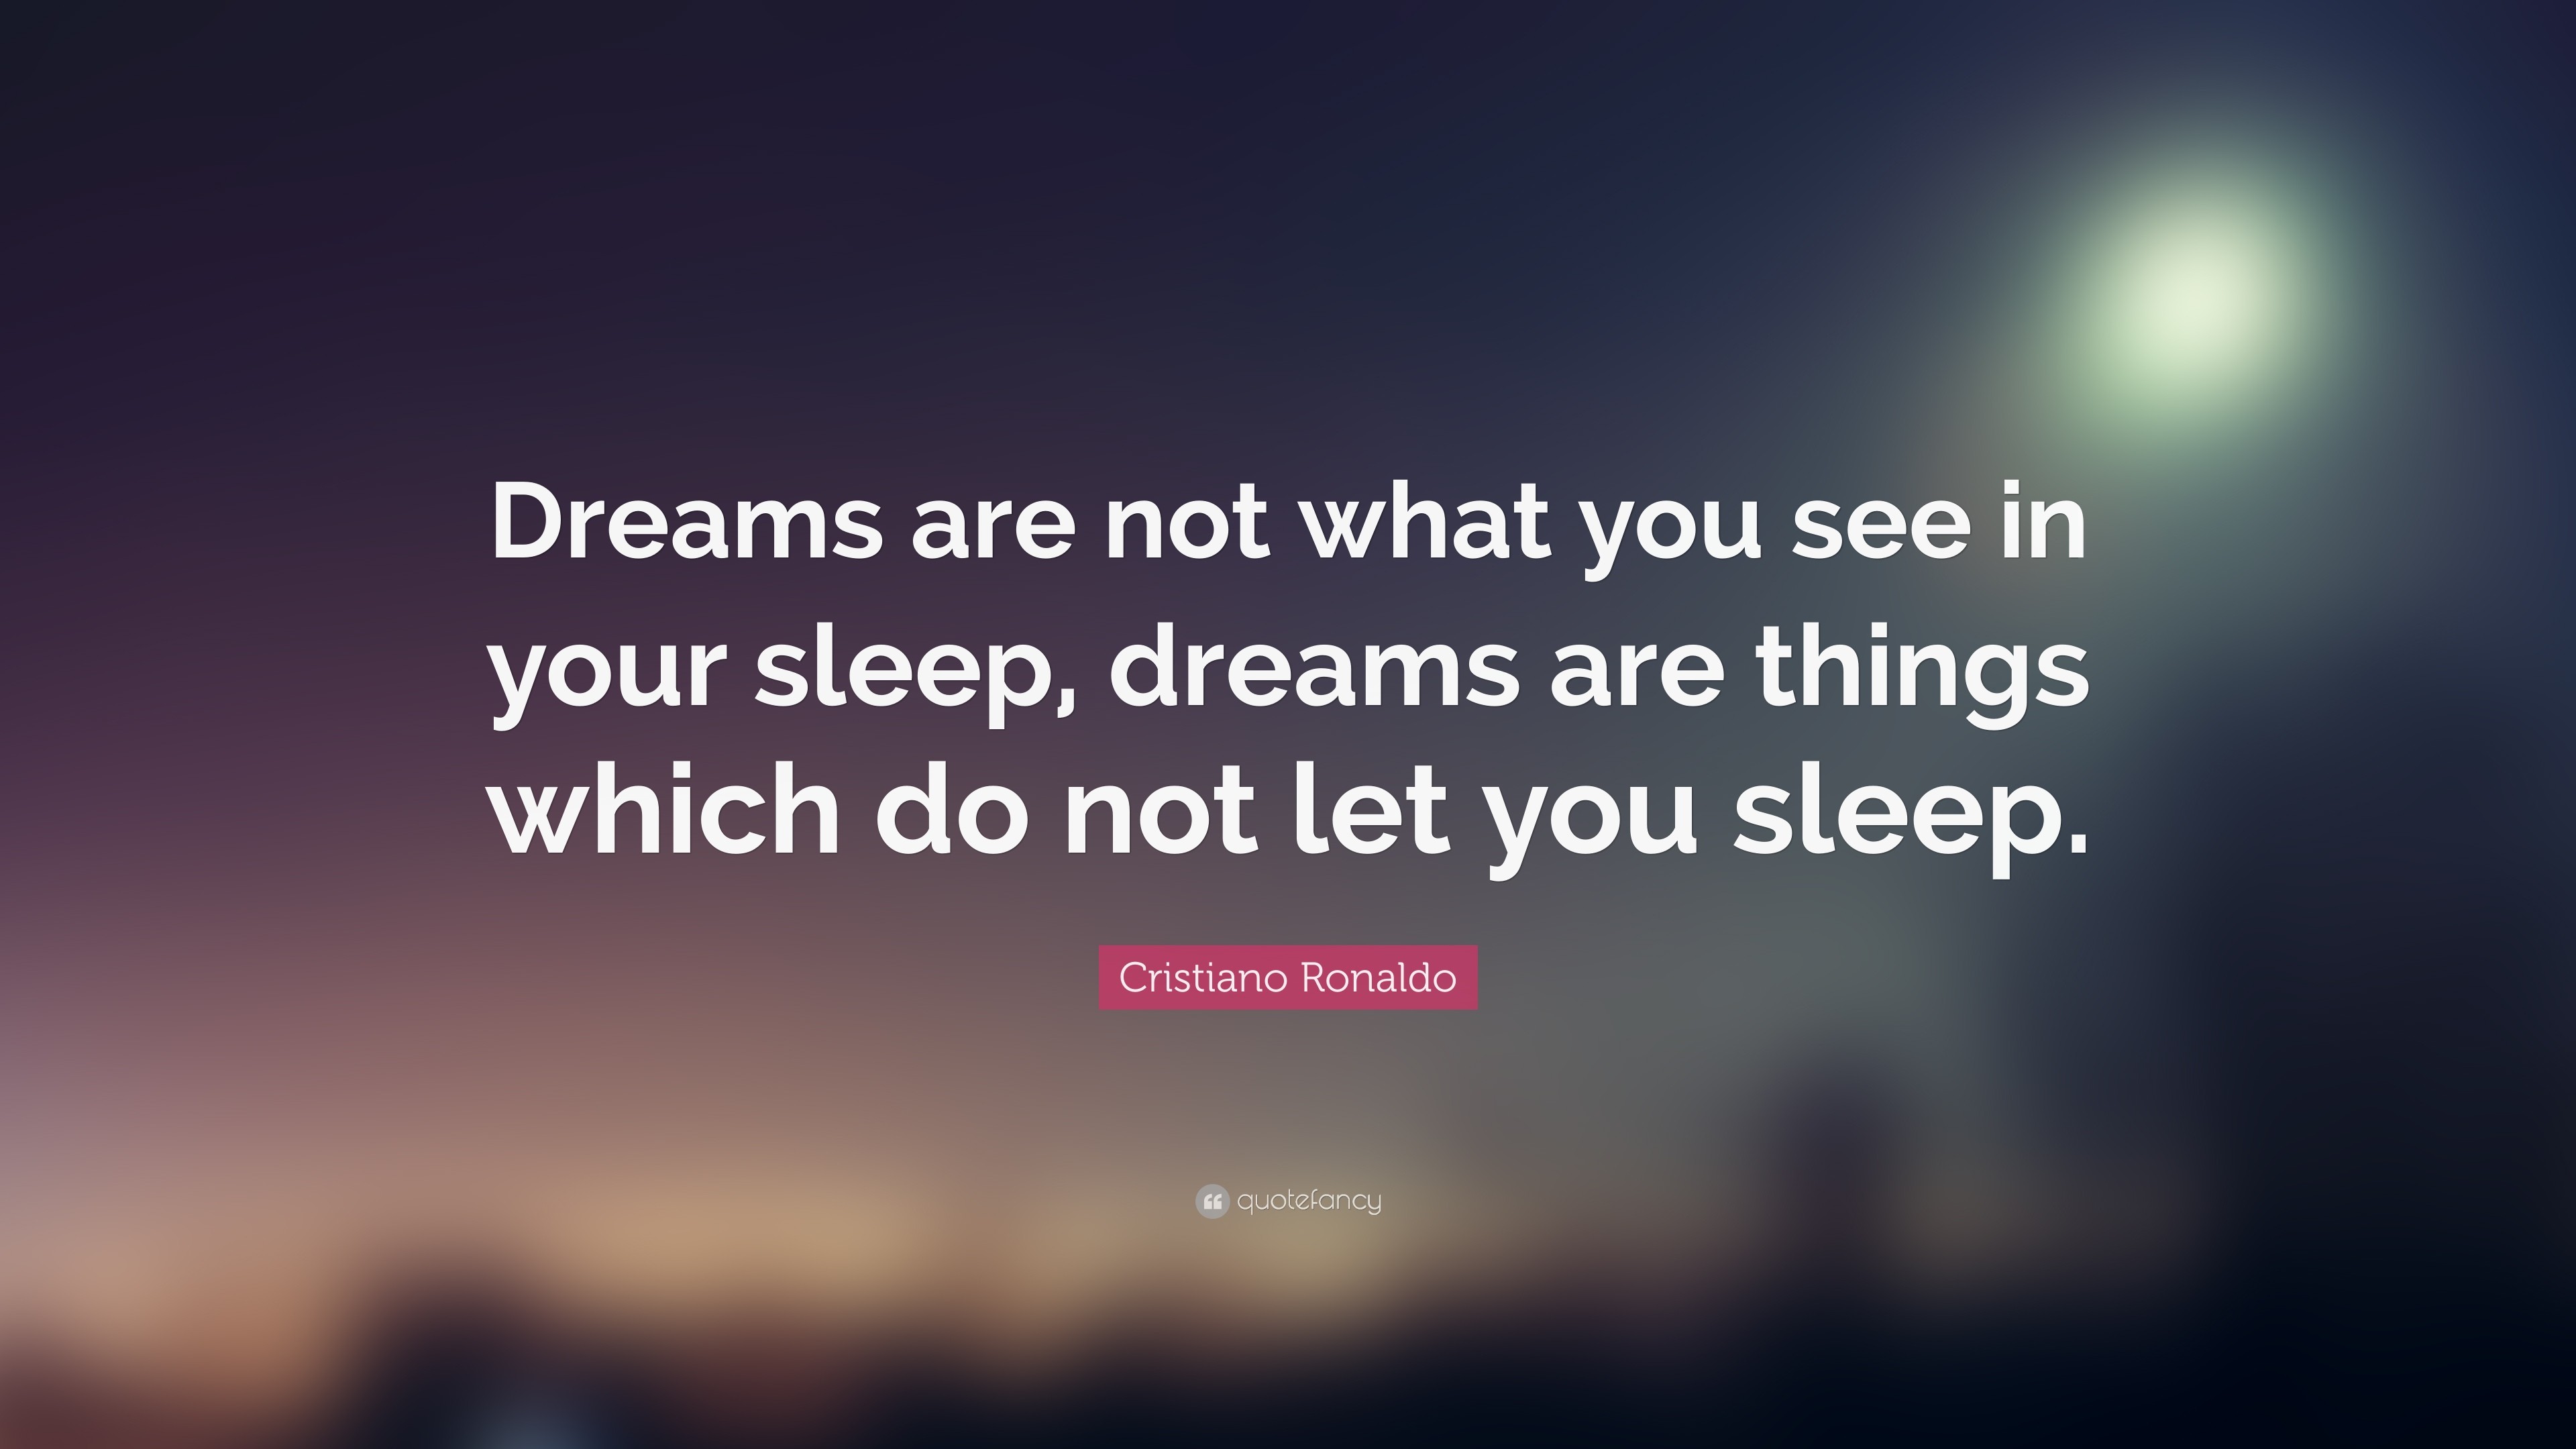 3840x2160 Sleep Quotes: “Dreams are not what you see in your sleep, dreams are